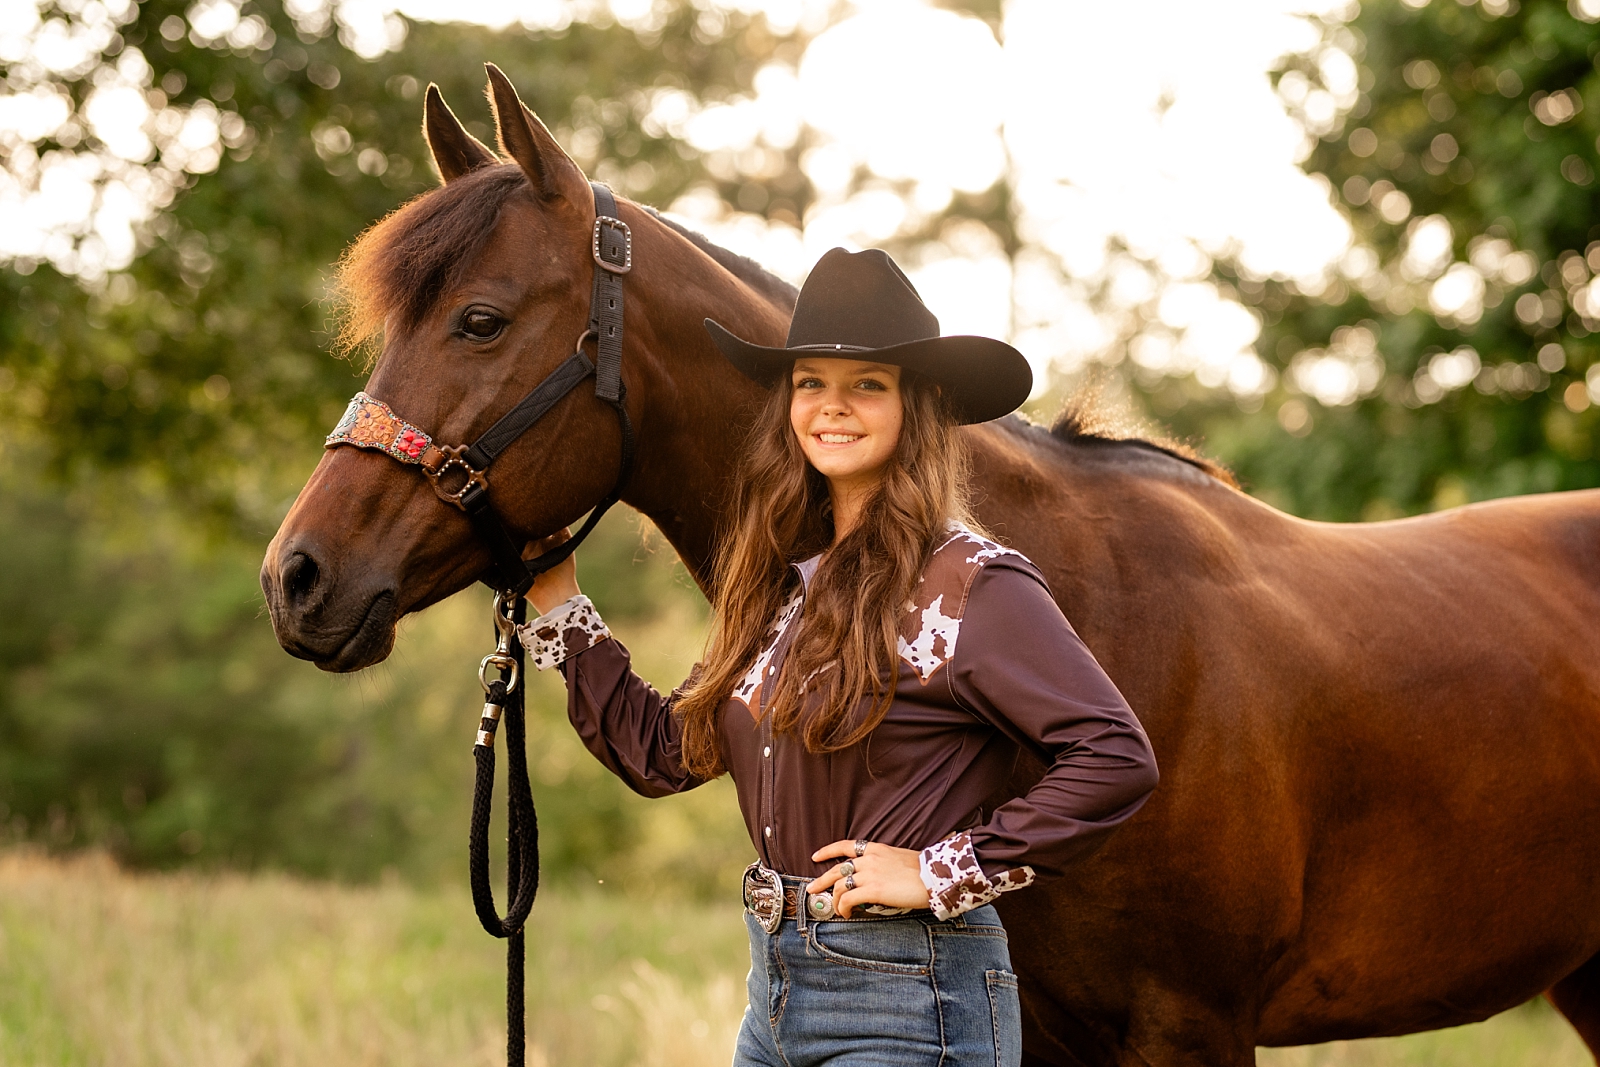 Barrel racer poses with her horse wearing cowgirl hat and cow hide shirt.